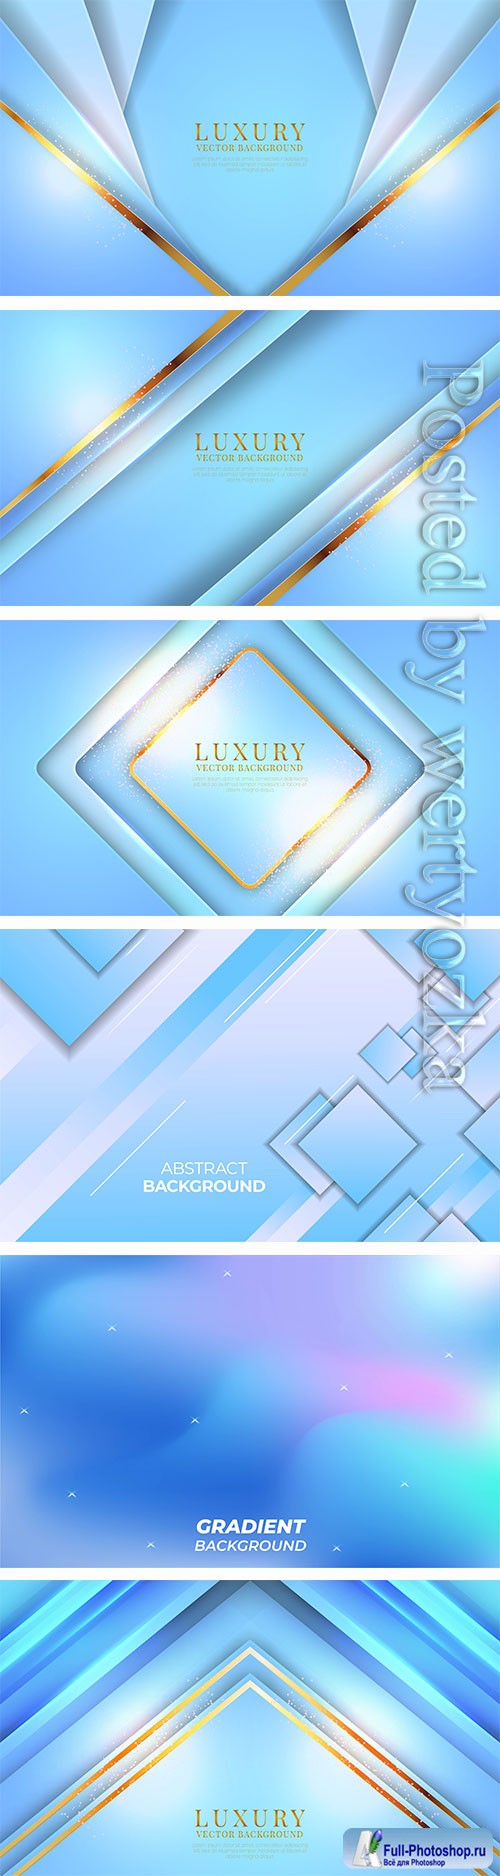 Bblue background with a blue and gold vector texture